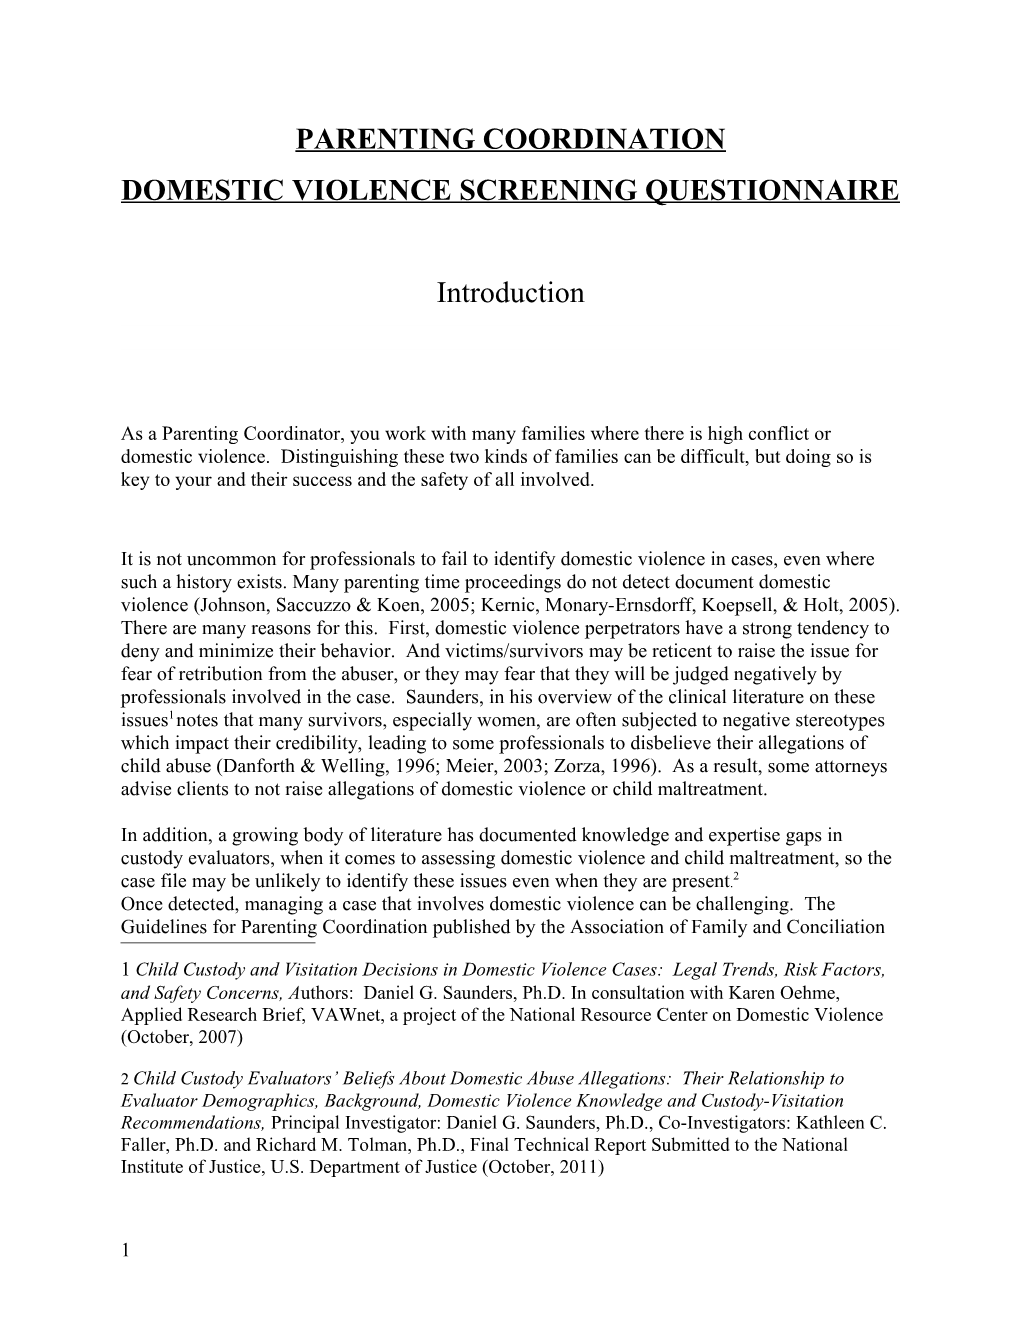 Domestic Violence Screening Questionnaire